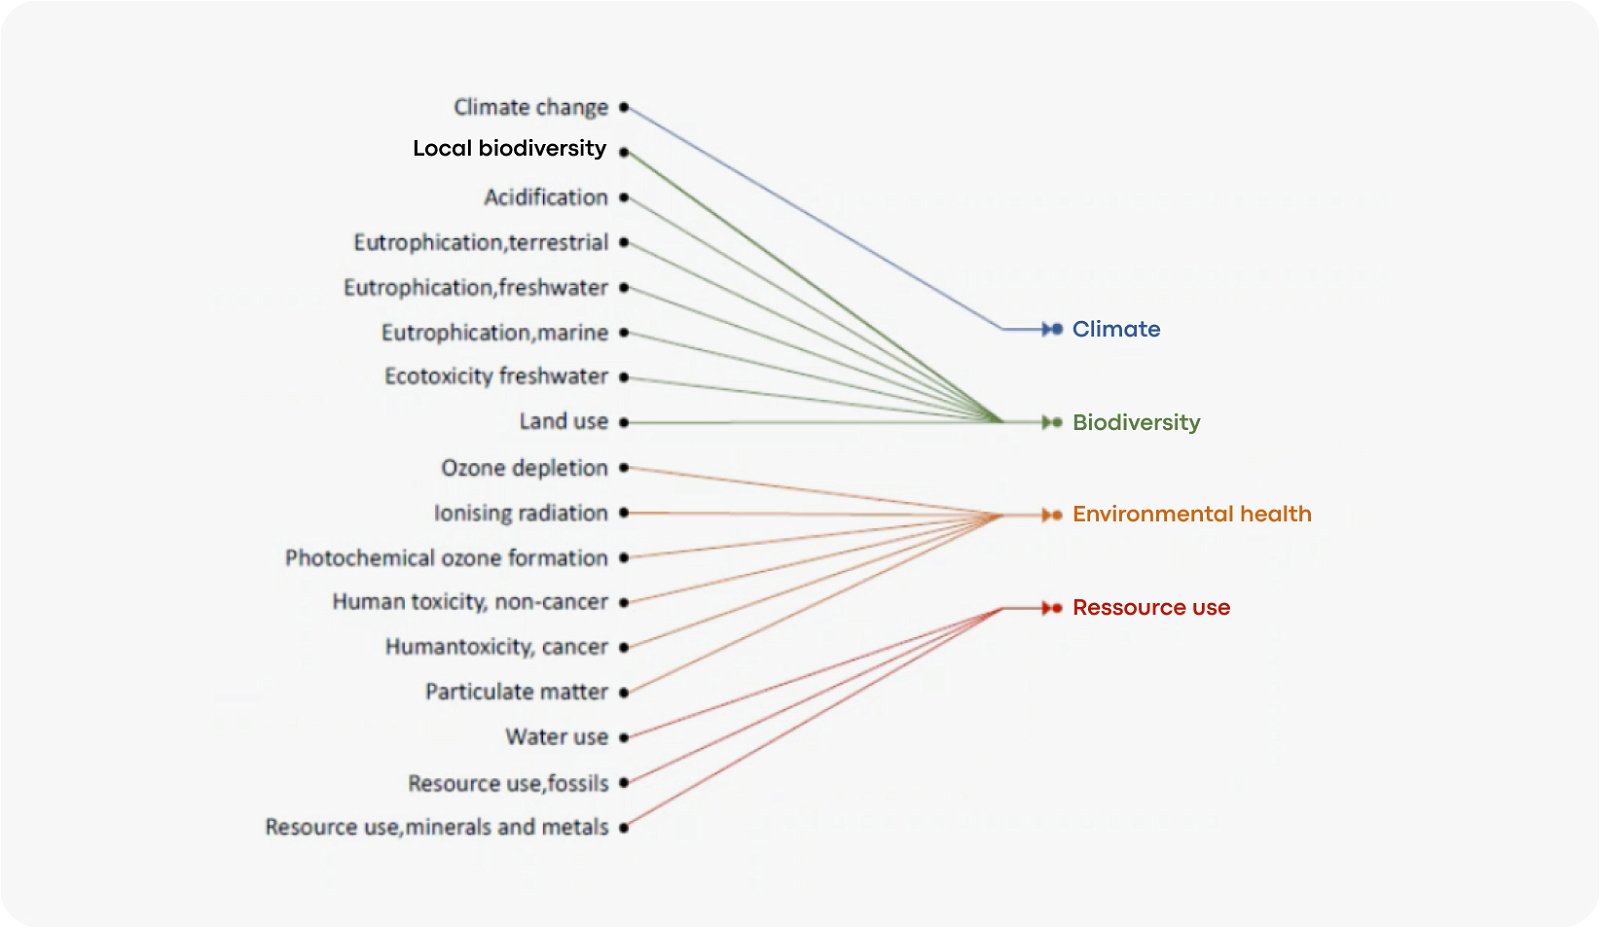 A visualization of the different environmental indicators of the PEFCR. 